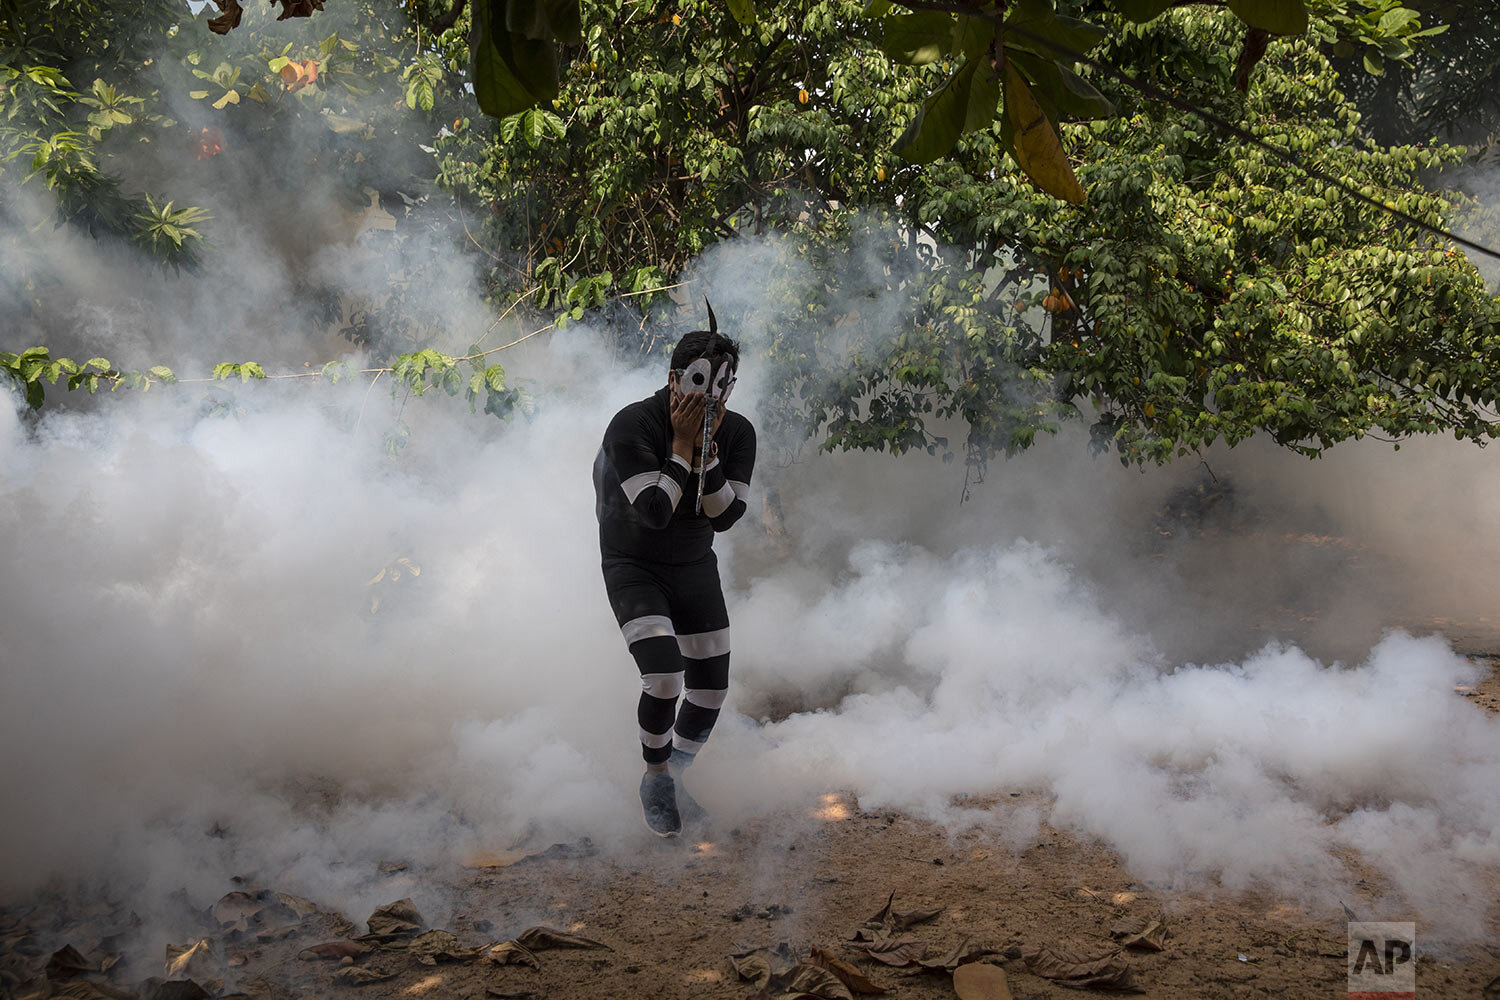  An actor who was hired by the government to assume the role of a mosquito is engulfed by clouds of pesticide during a fumigation campaign against dengue in Pucallpa, in Peru’s Ucayali region, Saturday, Oct. 3, 2020. (AP Photo/Rodrigo Abd) 